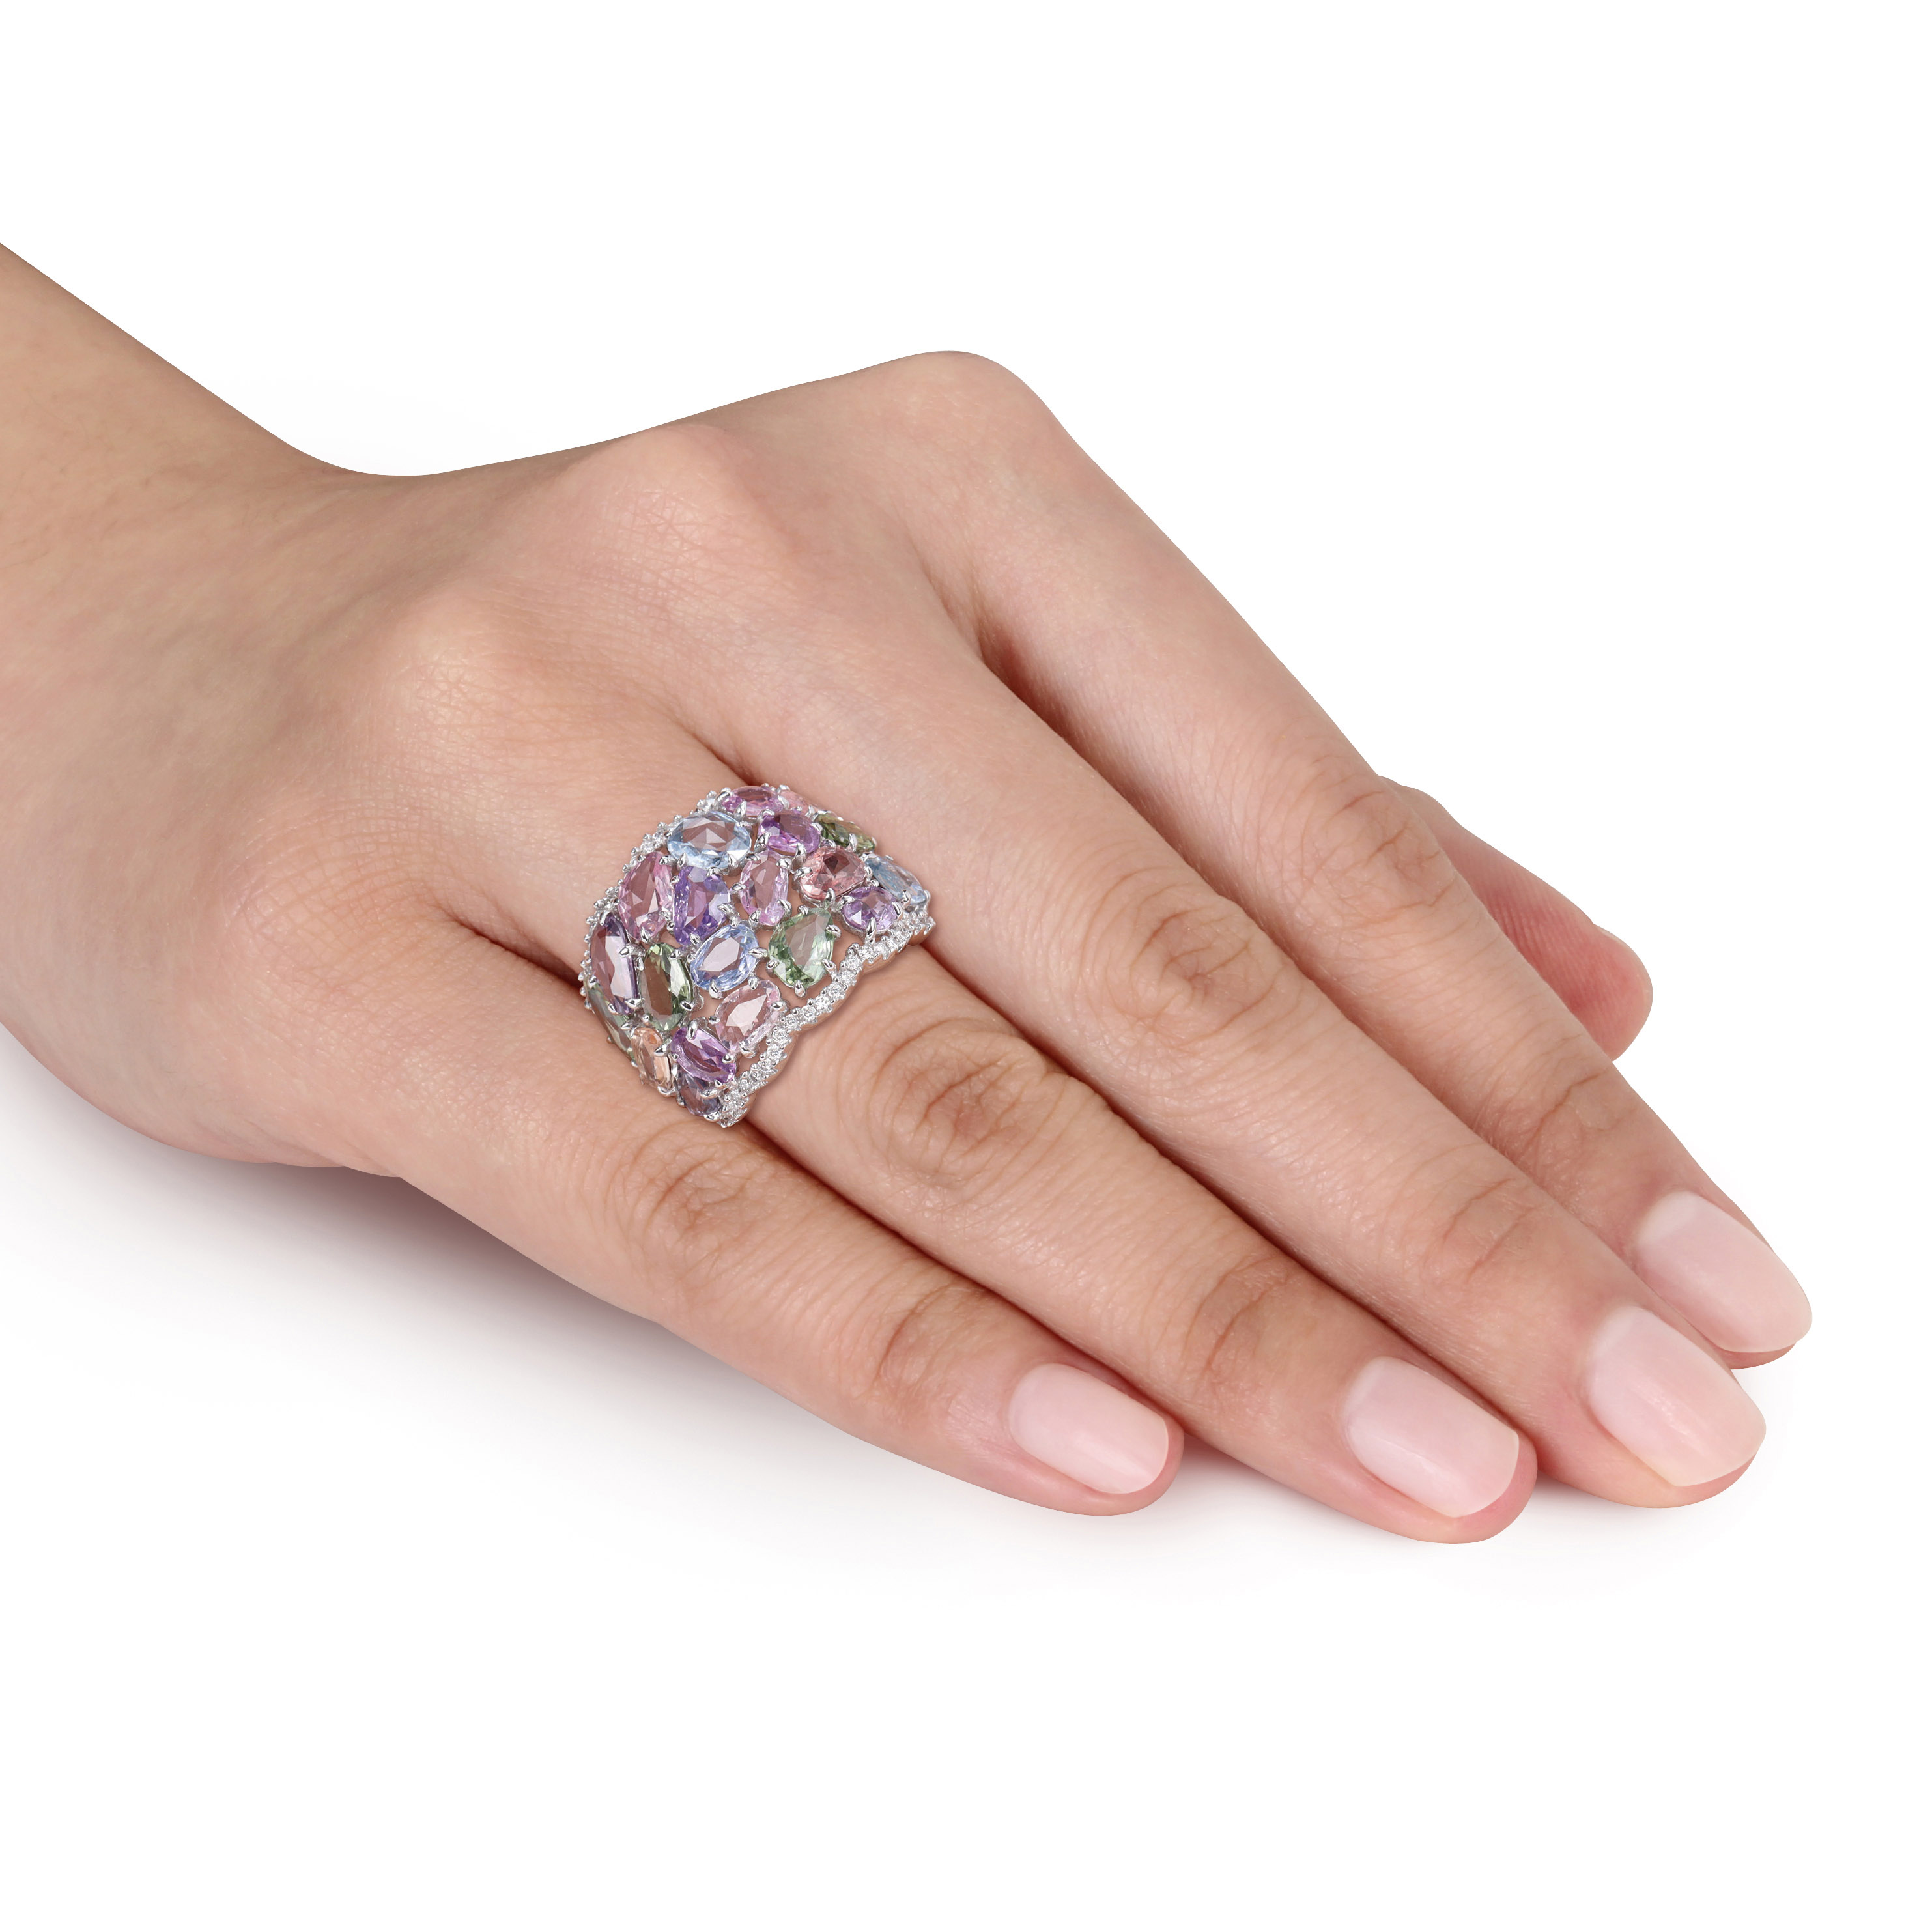 15 1/2 CT TGW Multi-Color Sapphire and 1/4 CT TDW Diamond Cocktail Ring in 14k White Gold